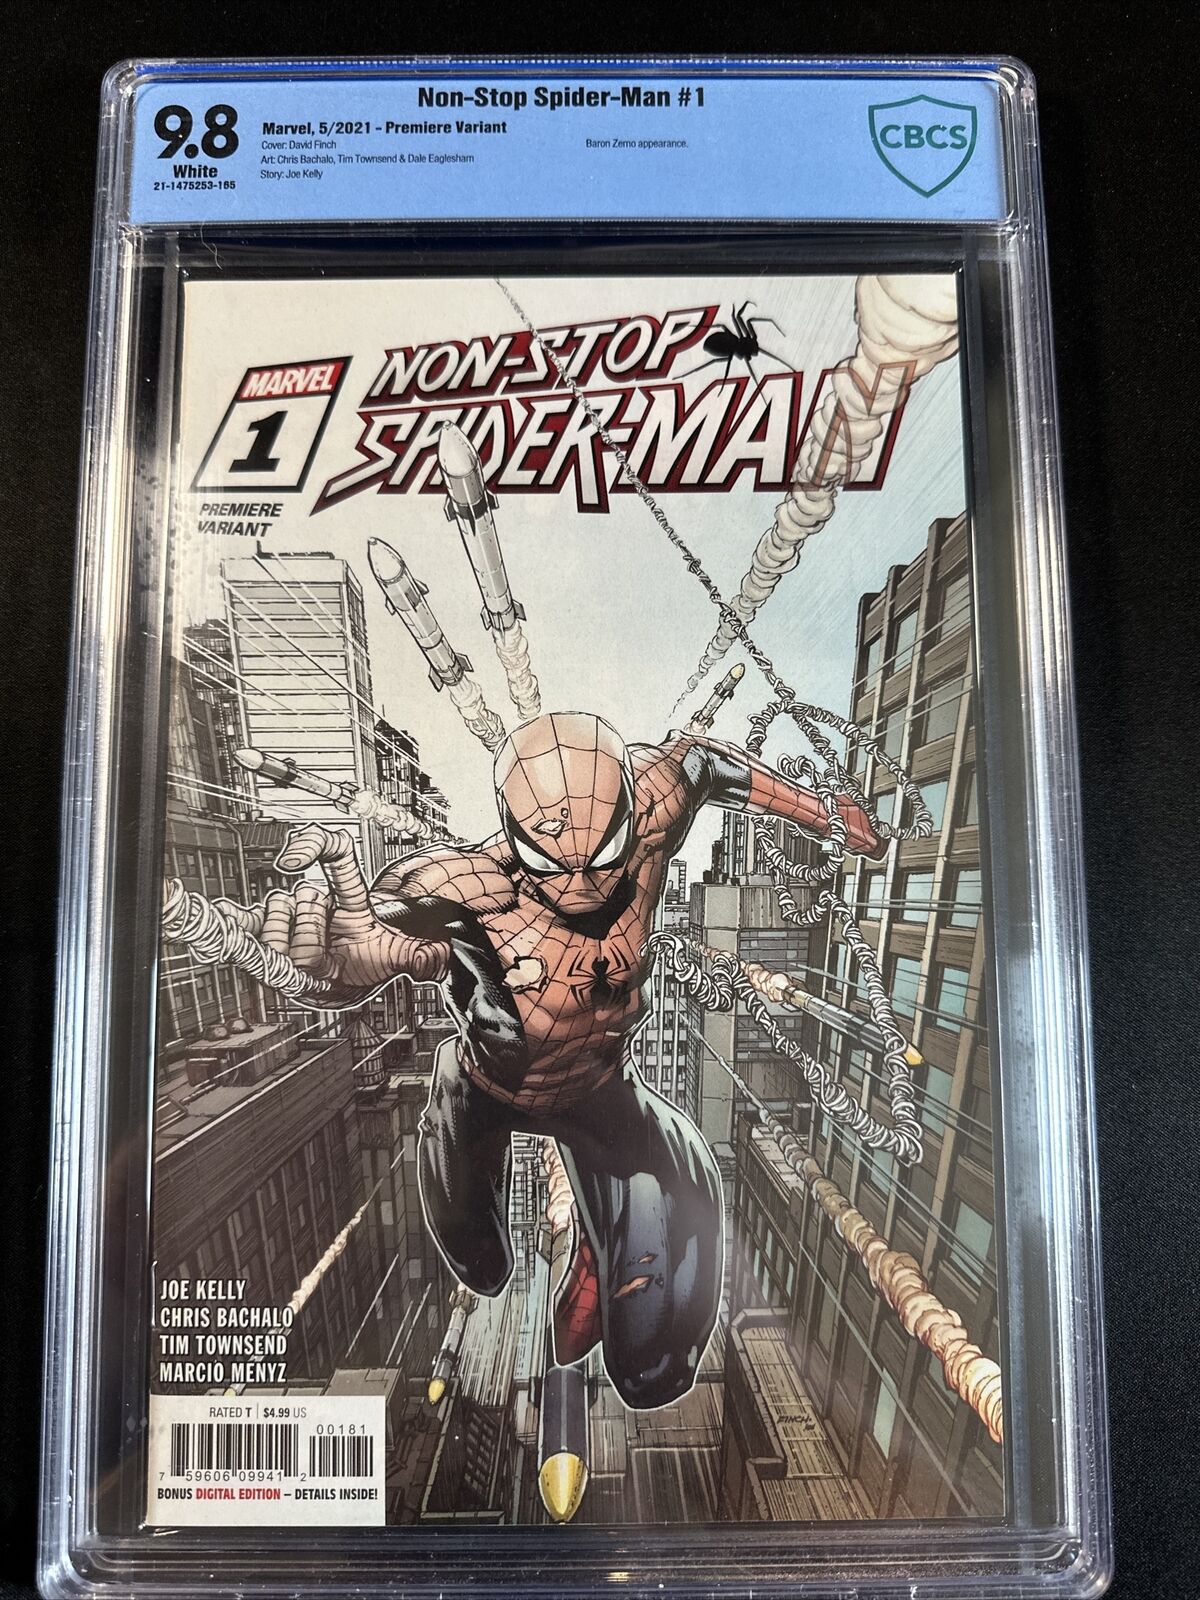 Non Stop Spider-Man #1 CBCS 9.8 Finch Premiere Variant Cover White Pages